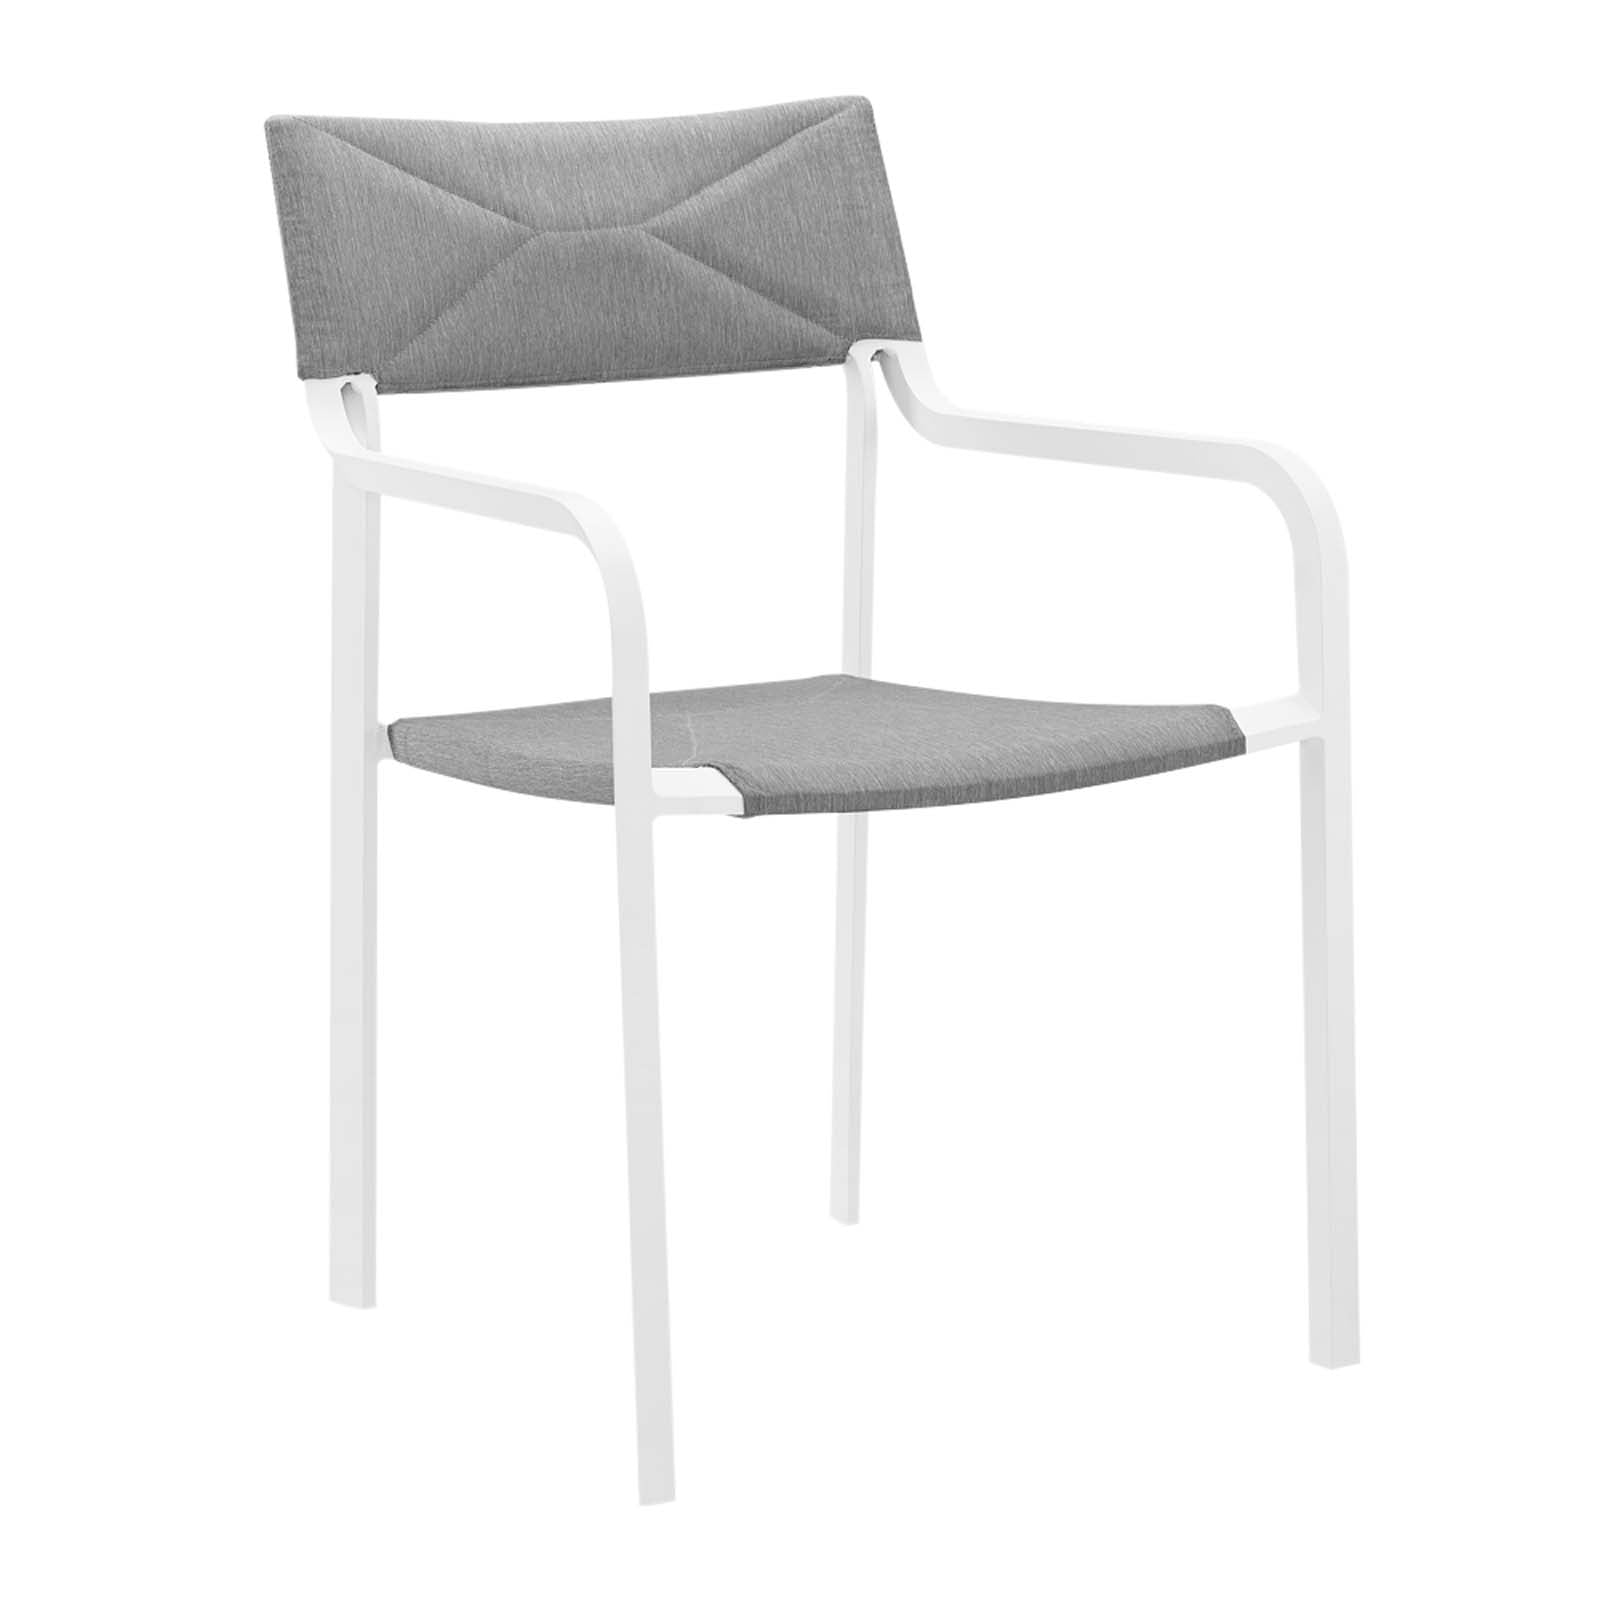 Raleigh Outdoor Patio Aluminum Armchair Set of 2-Outdoor Set-Modway-Wall2Wall Furnishings